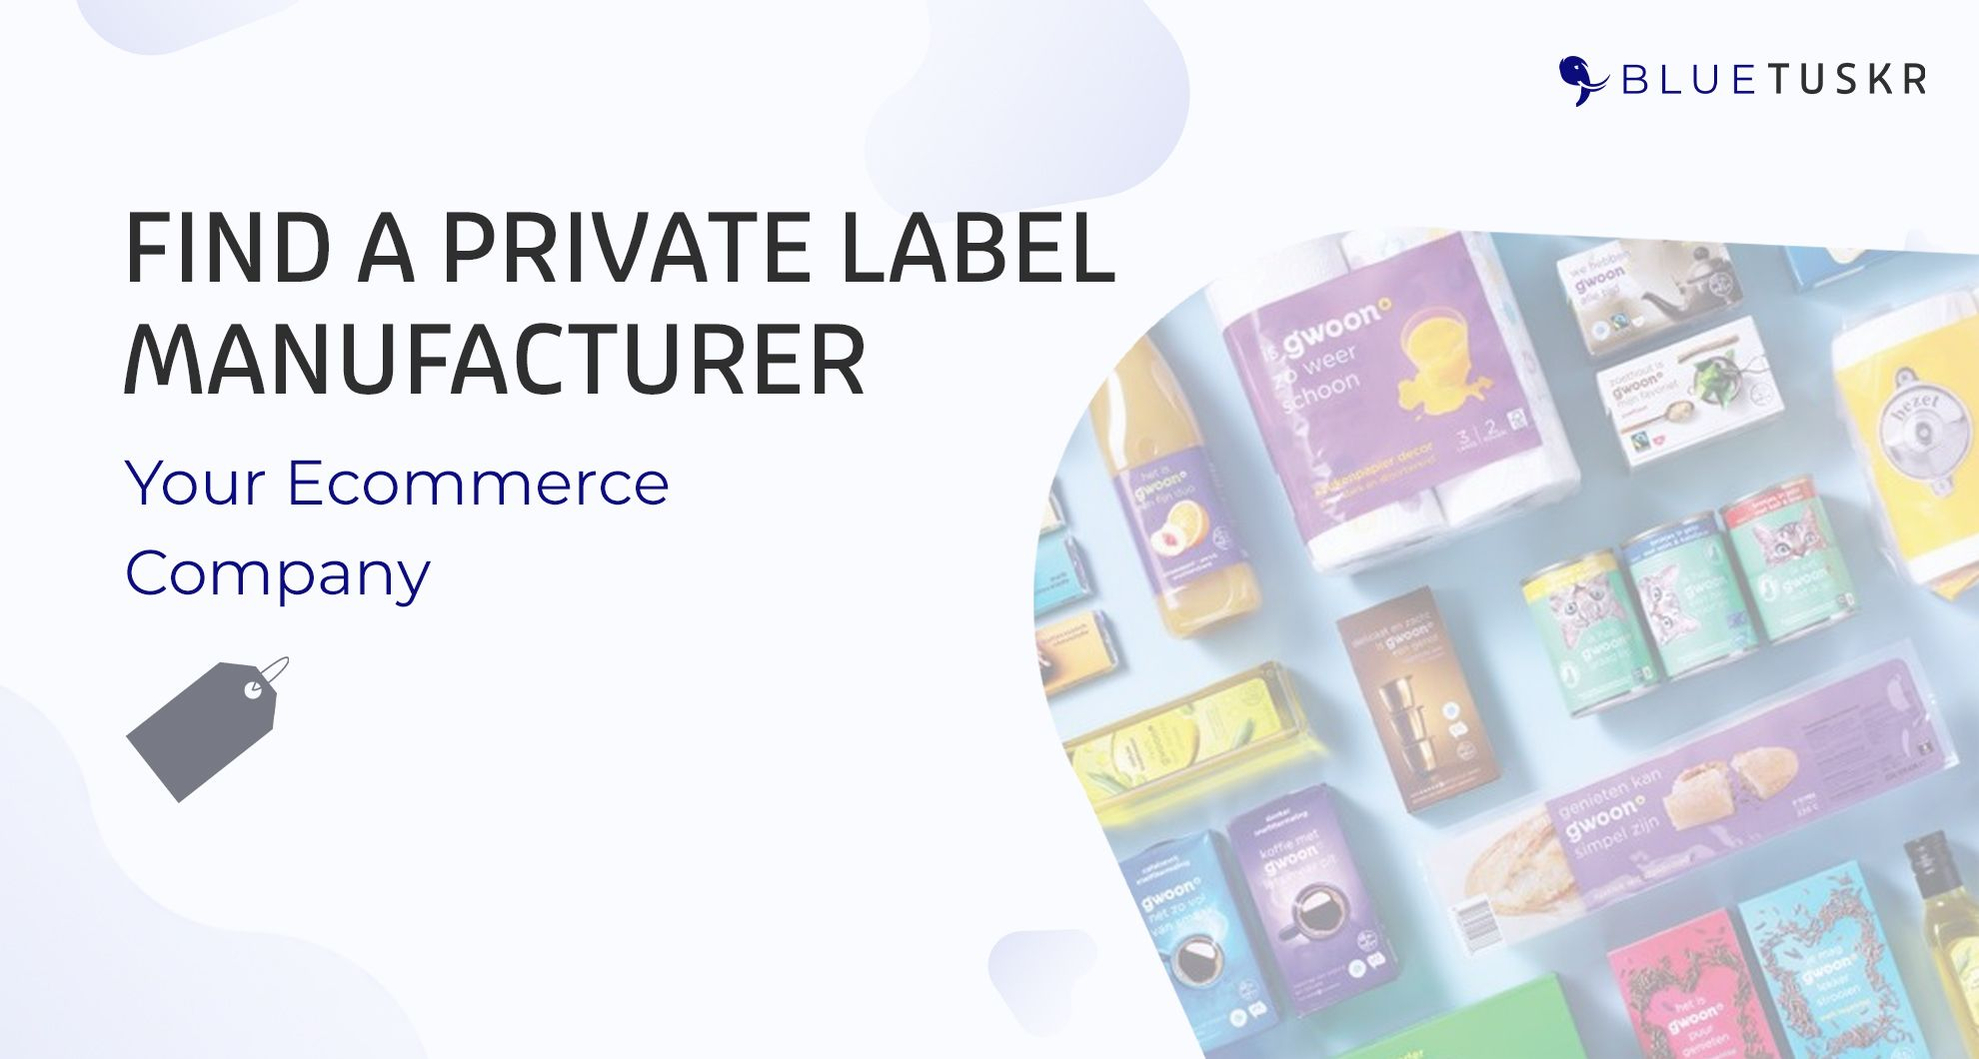 How to Find a Private Label Manufacturer for Your Ecommerce Company